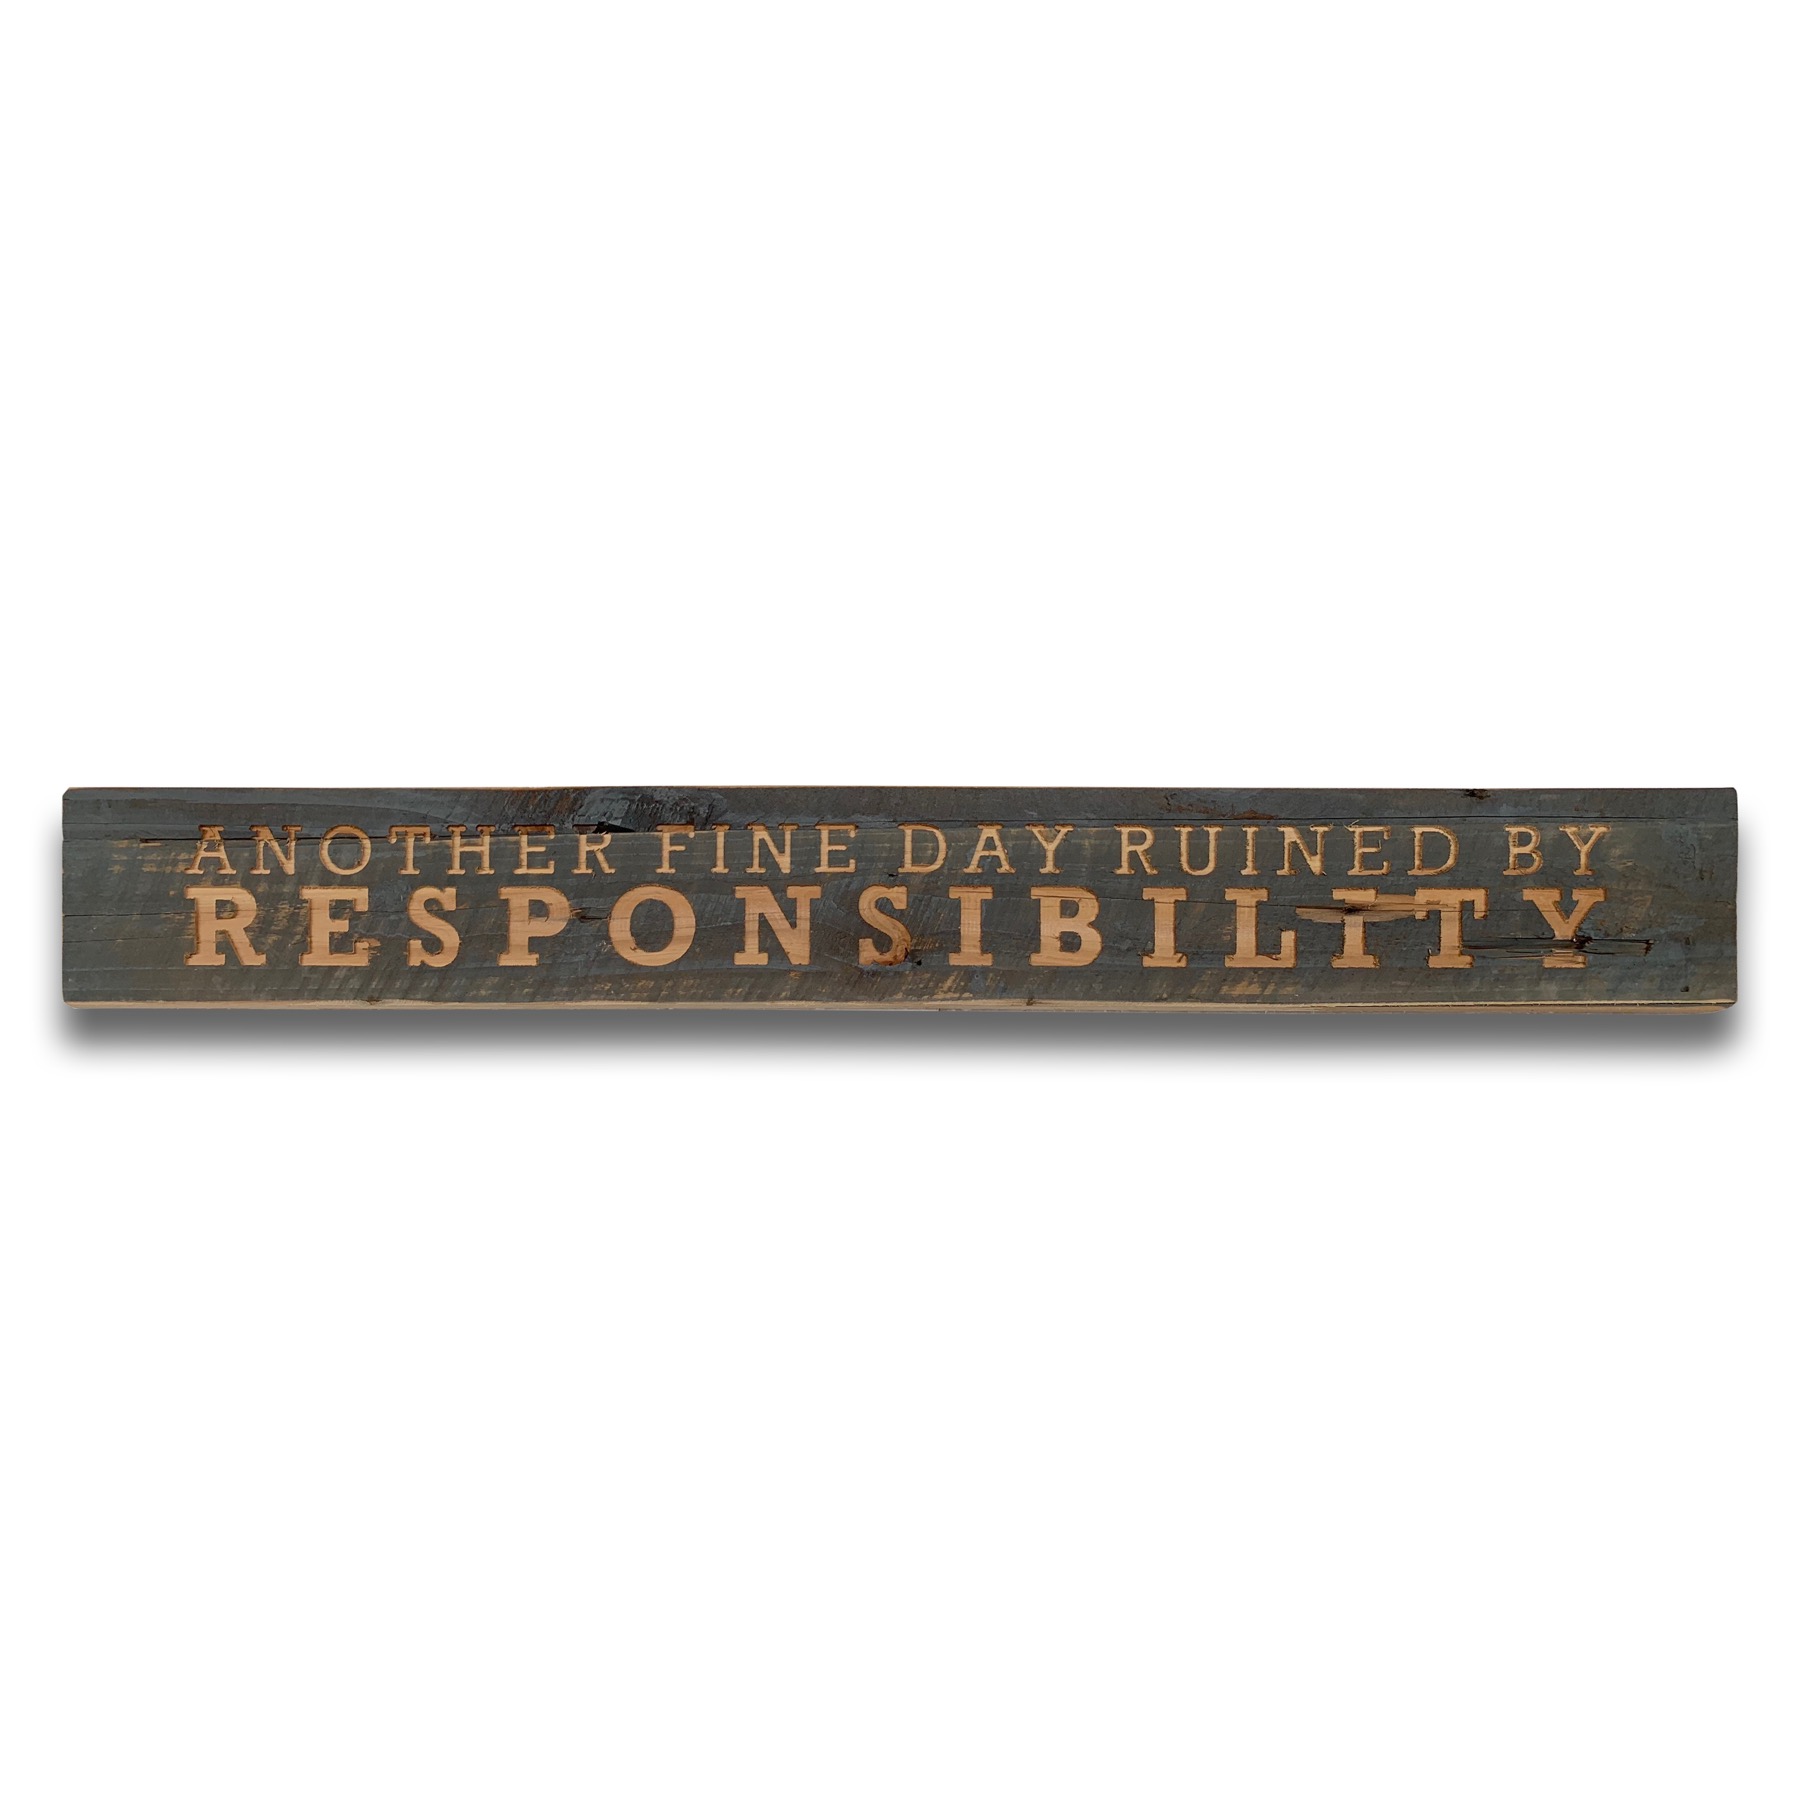 Responsibility Grey Wash Wooden Message Plaque - Image 1